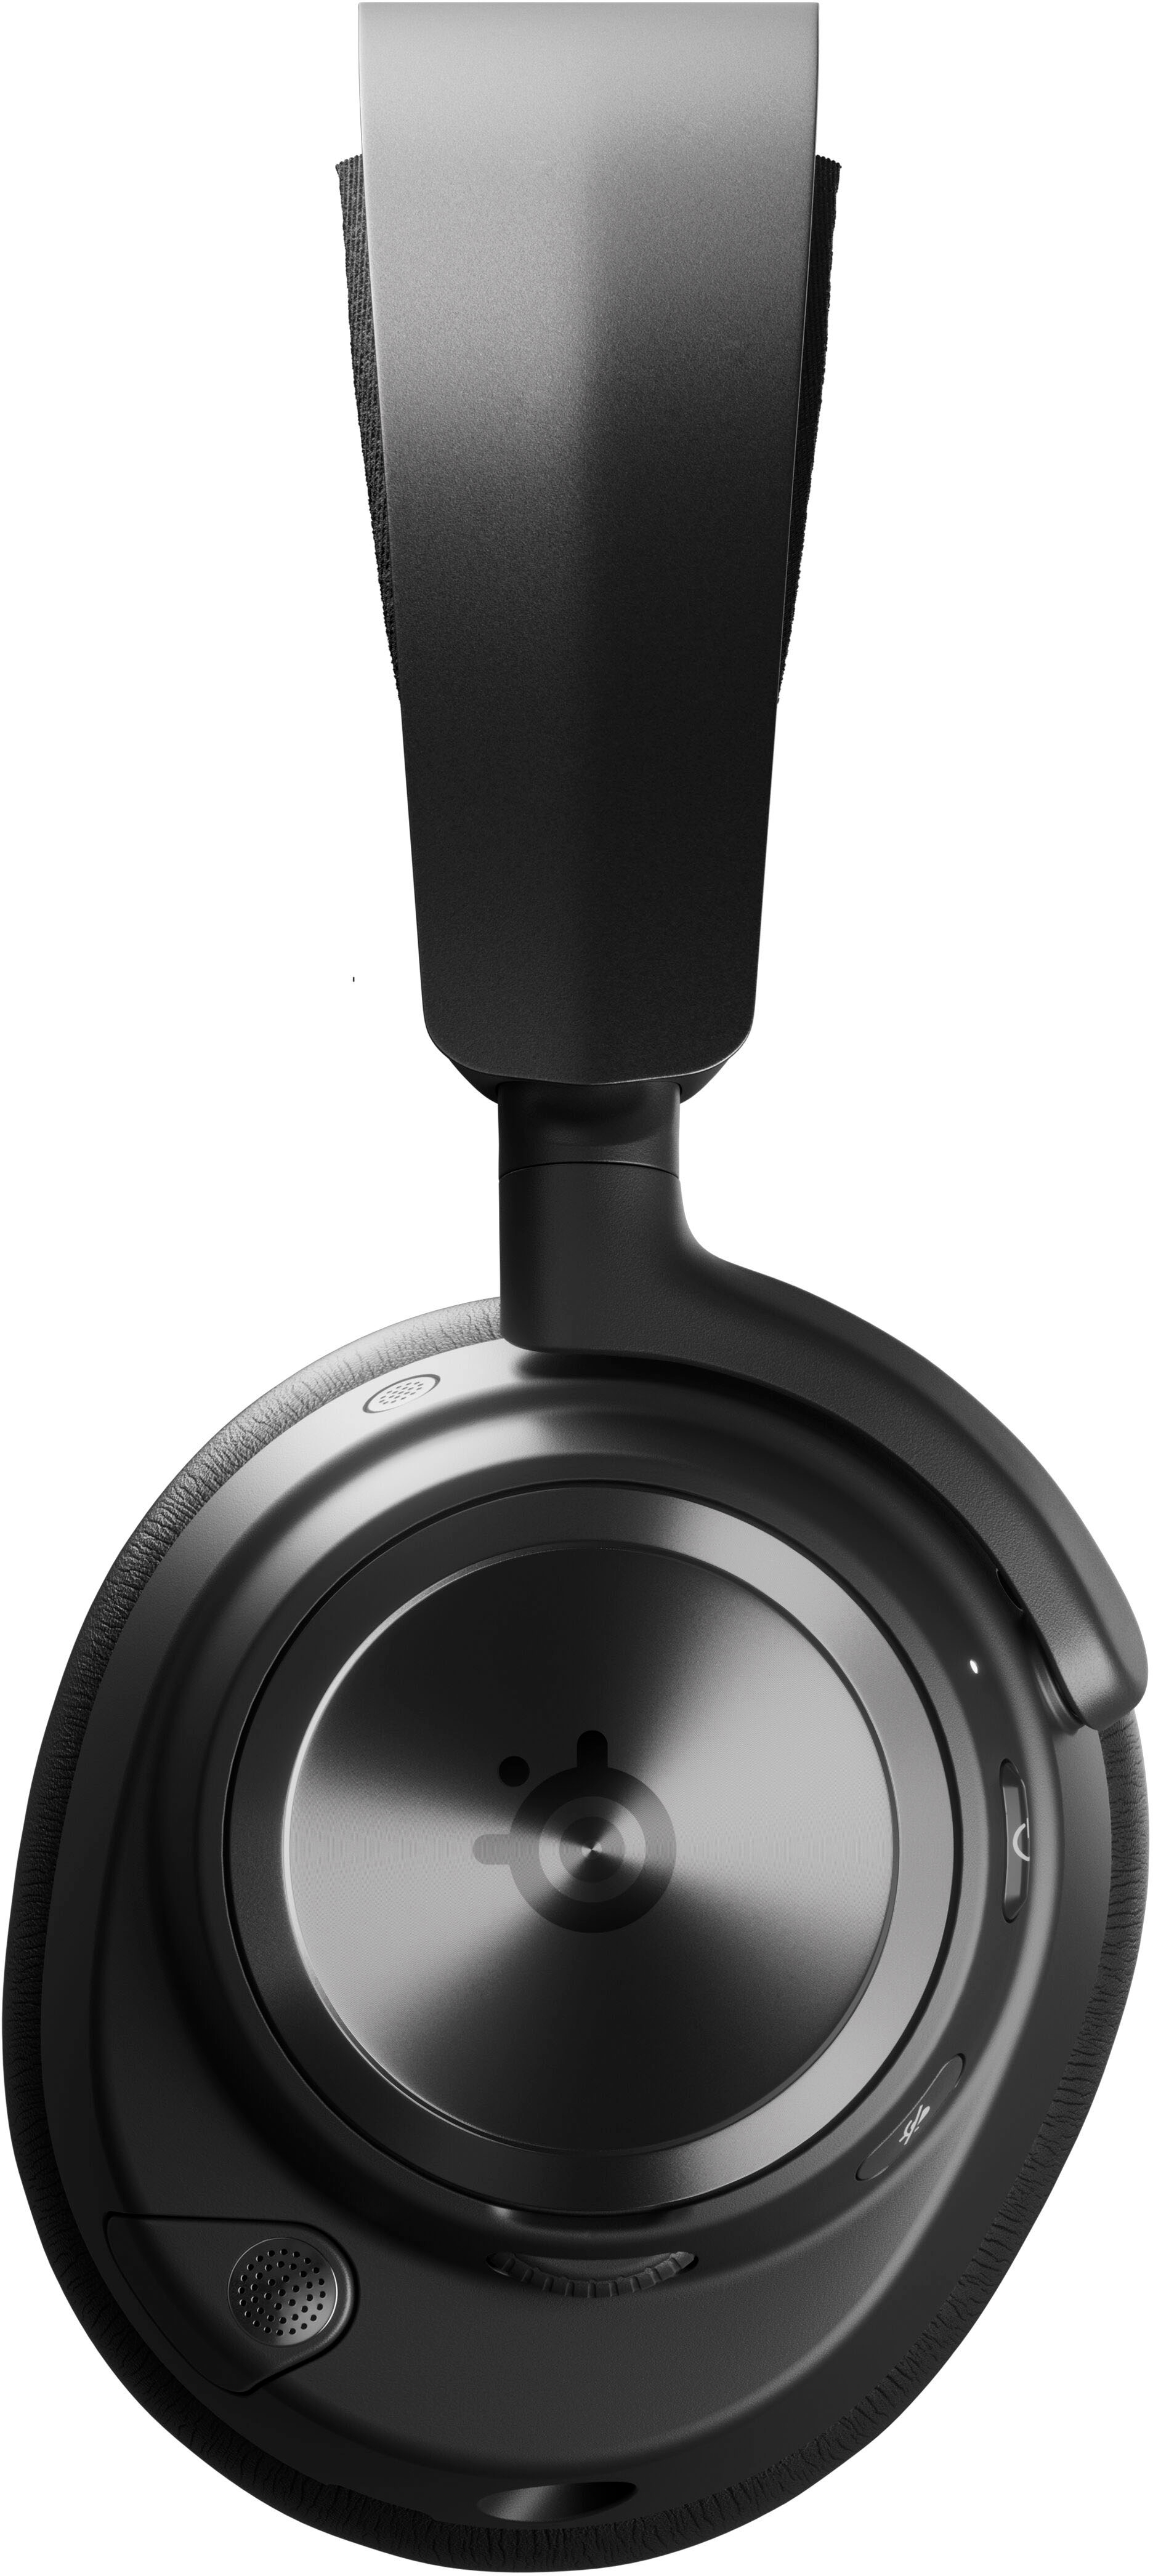 SteelSeries Arctis Nova Pro Wireless Xbox Multi-System Gaming Headset -  Premium Hi-Fi Drivers - Active Noise Cancellation Infinity Power System 